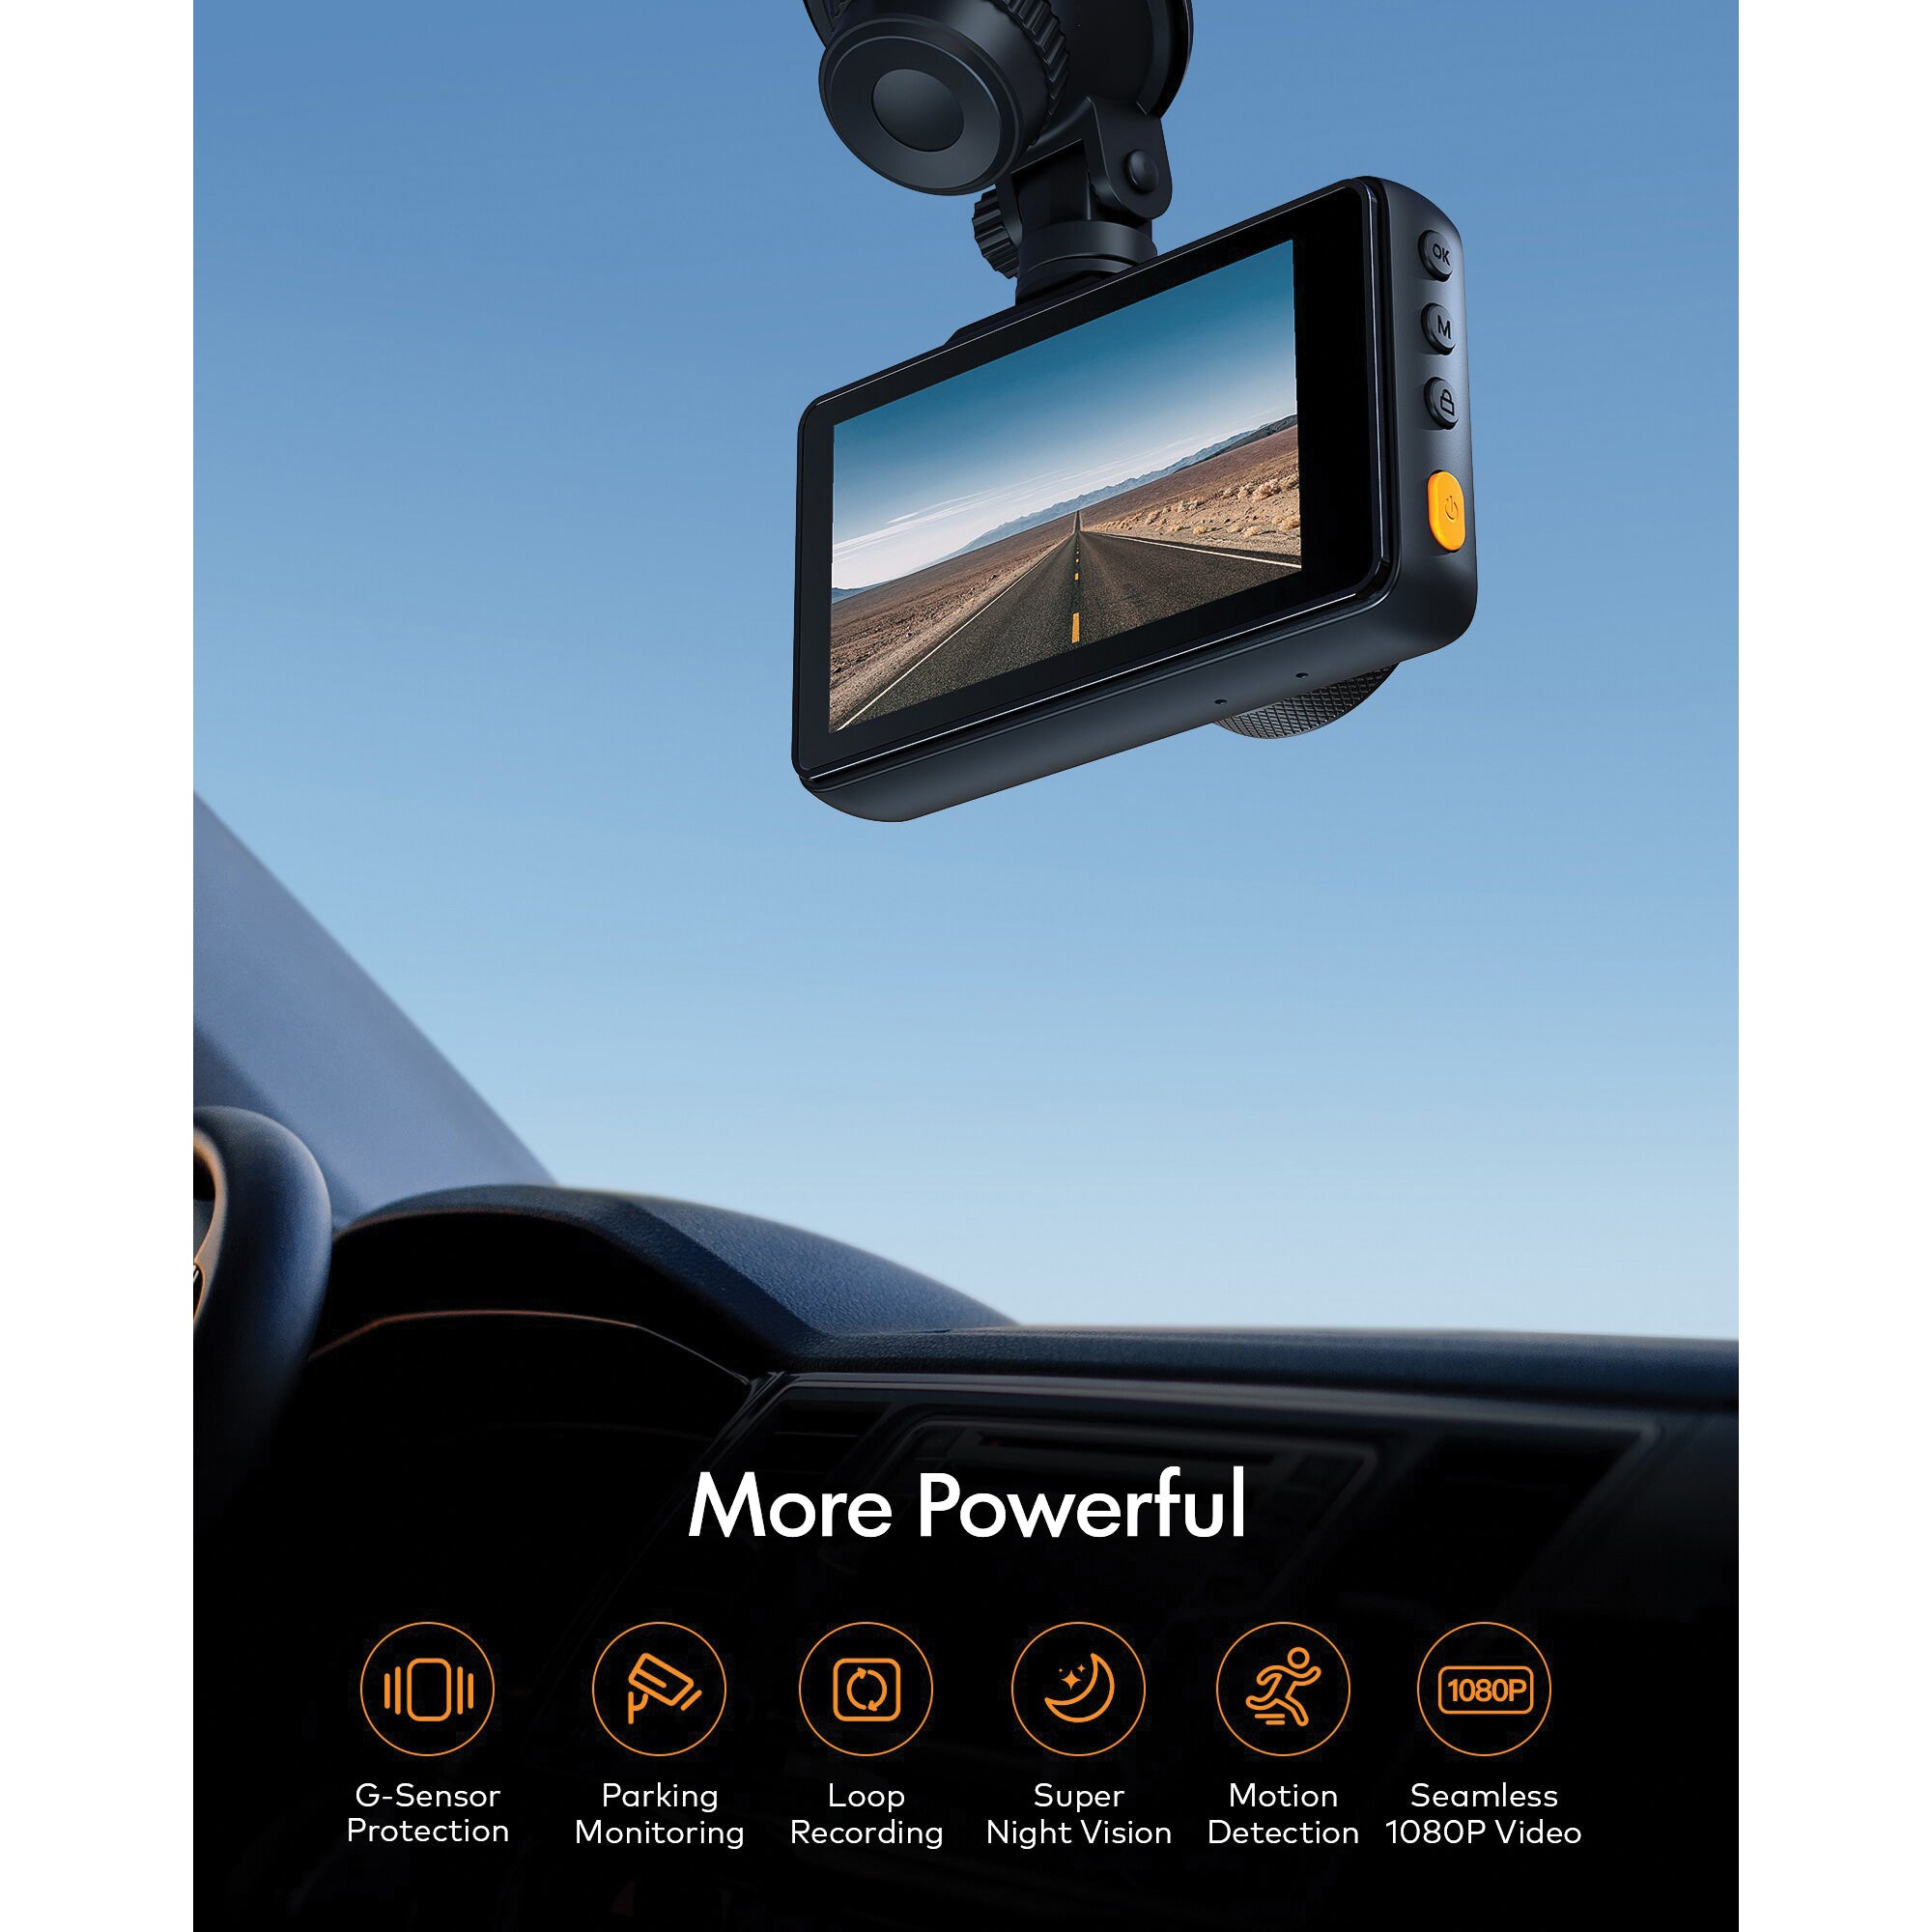 APEMAN's 1080p Dash Cam Features Two Cameras For Recording